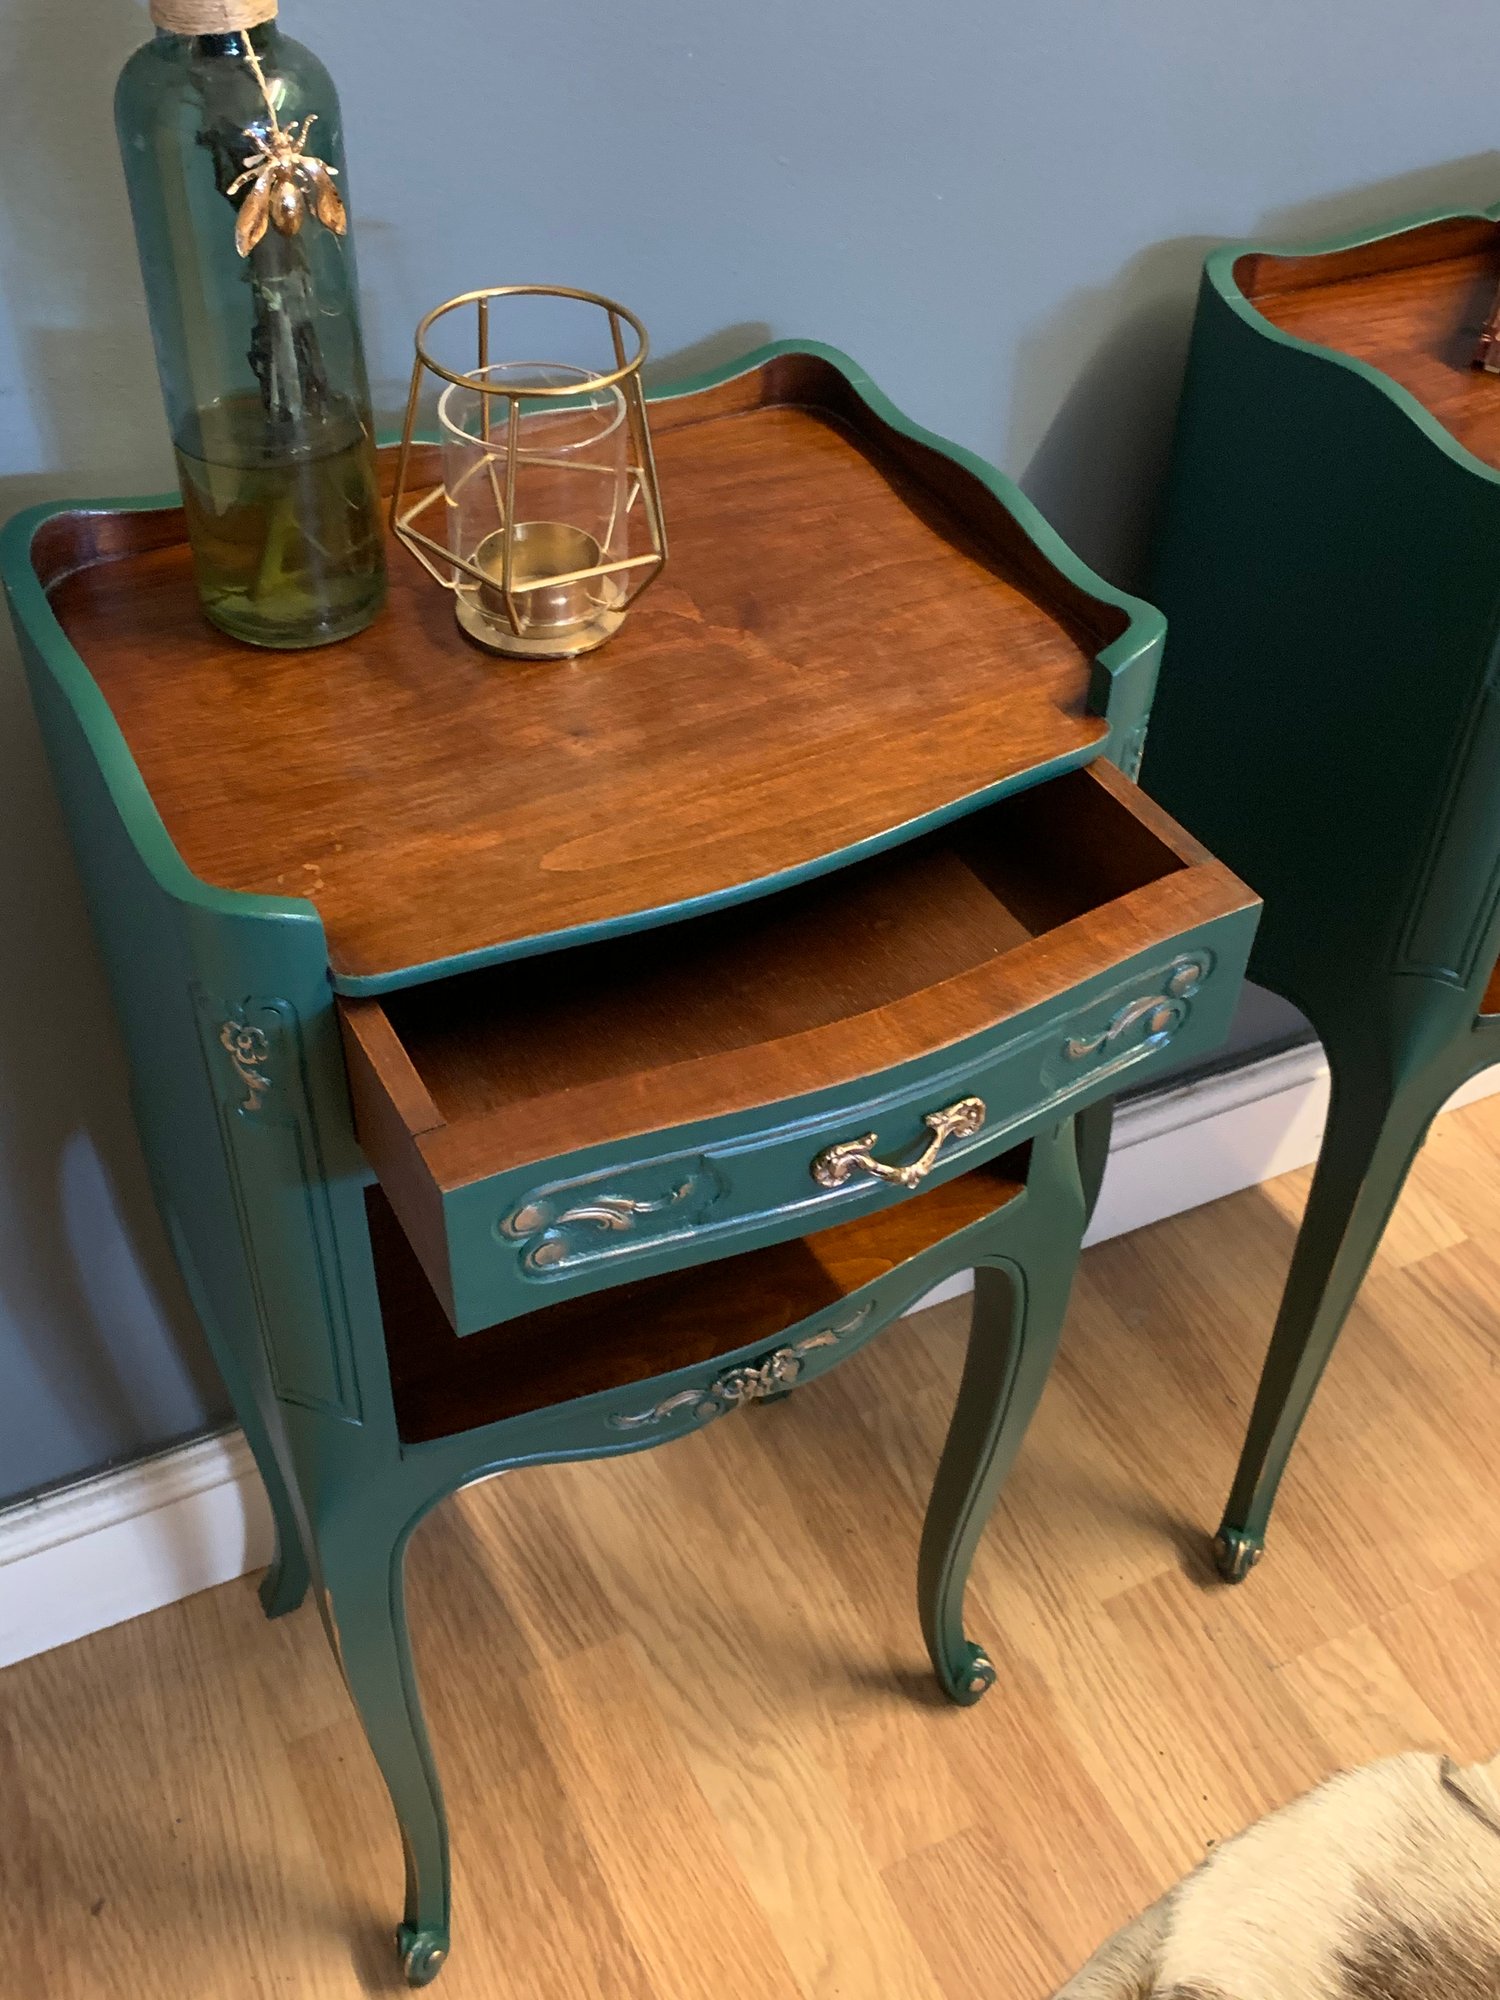 Image of A pair Of French dark green side tables